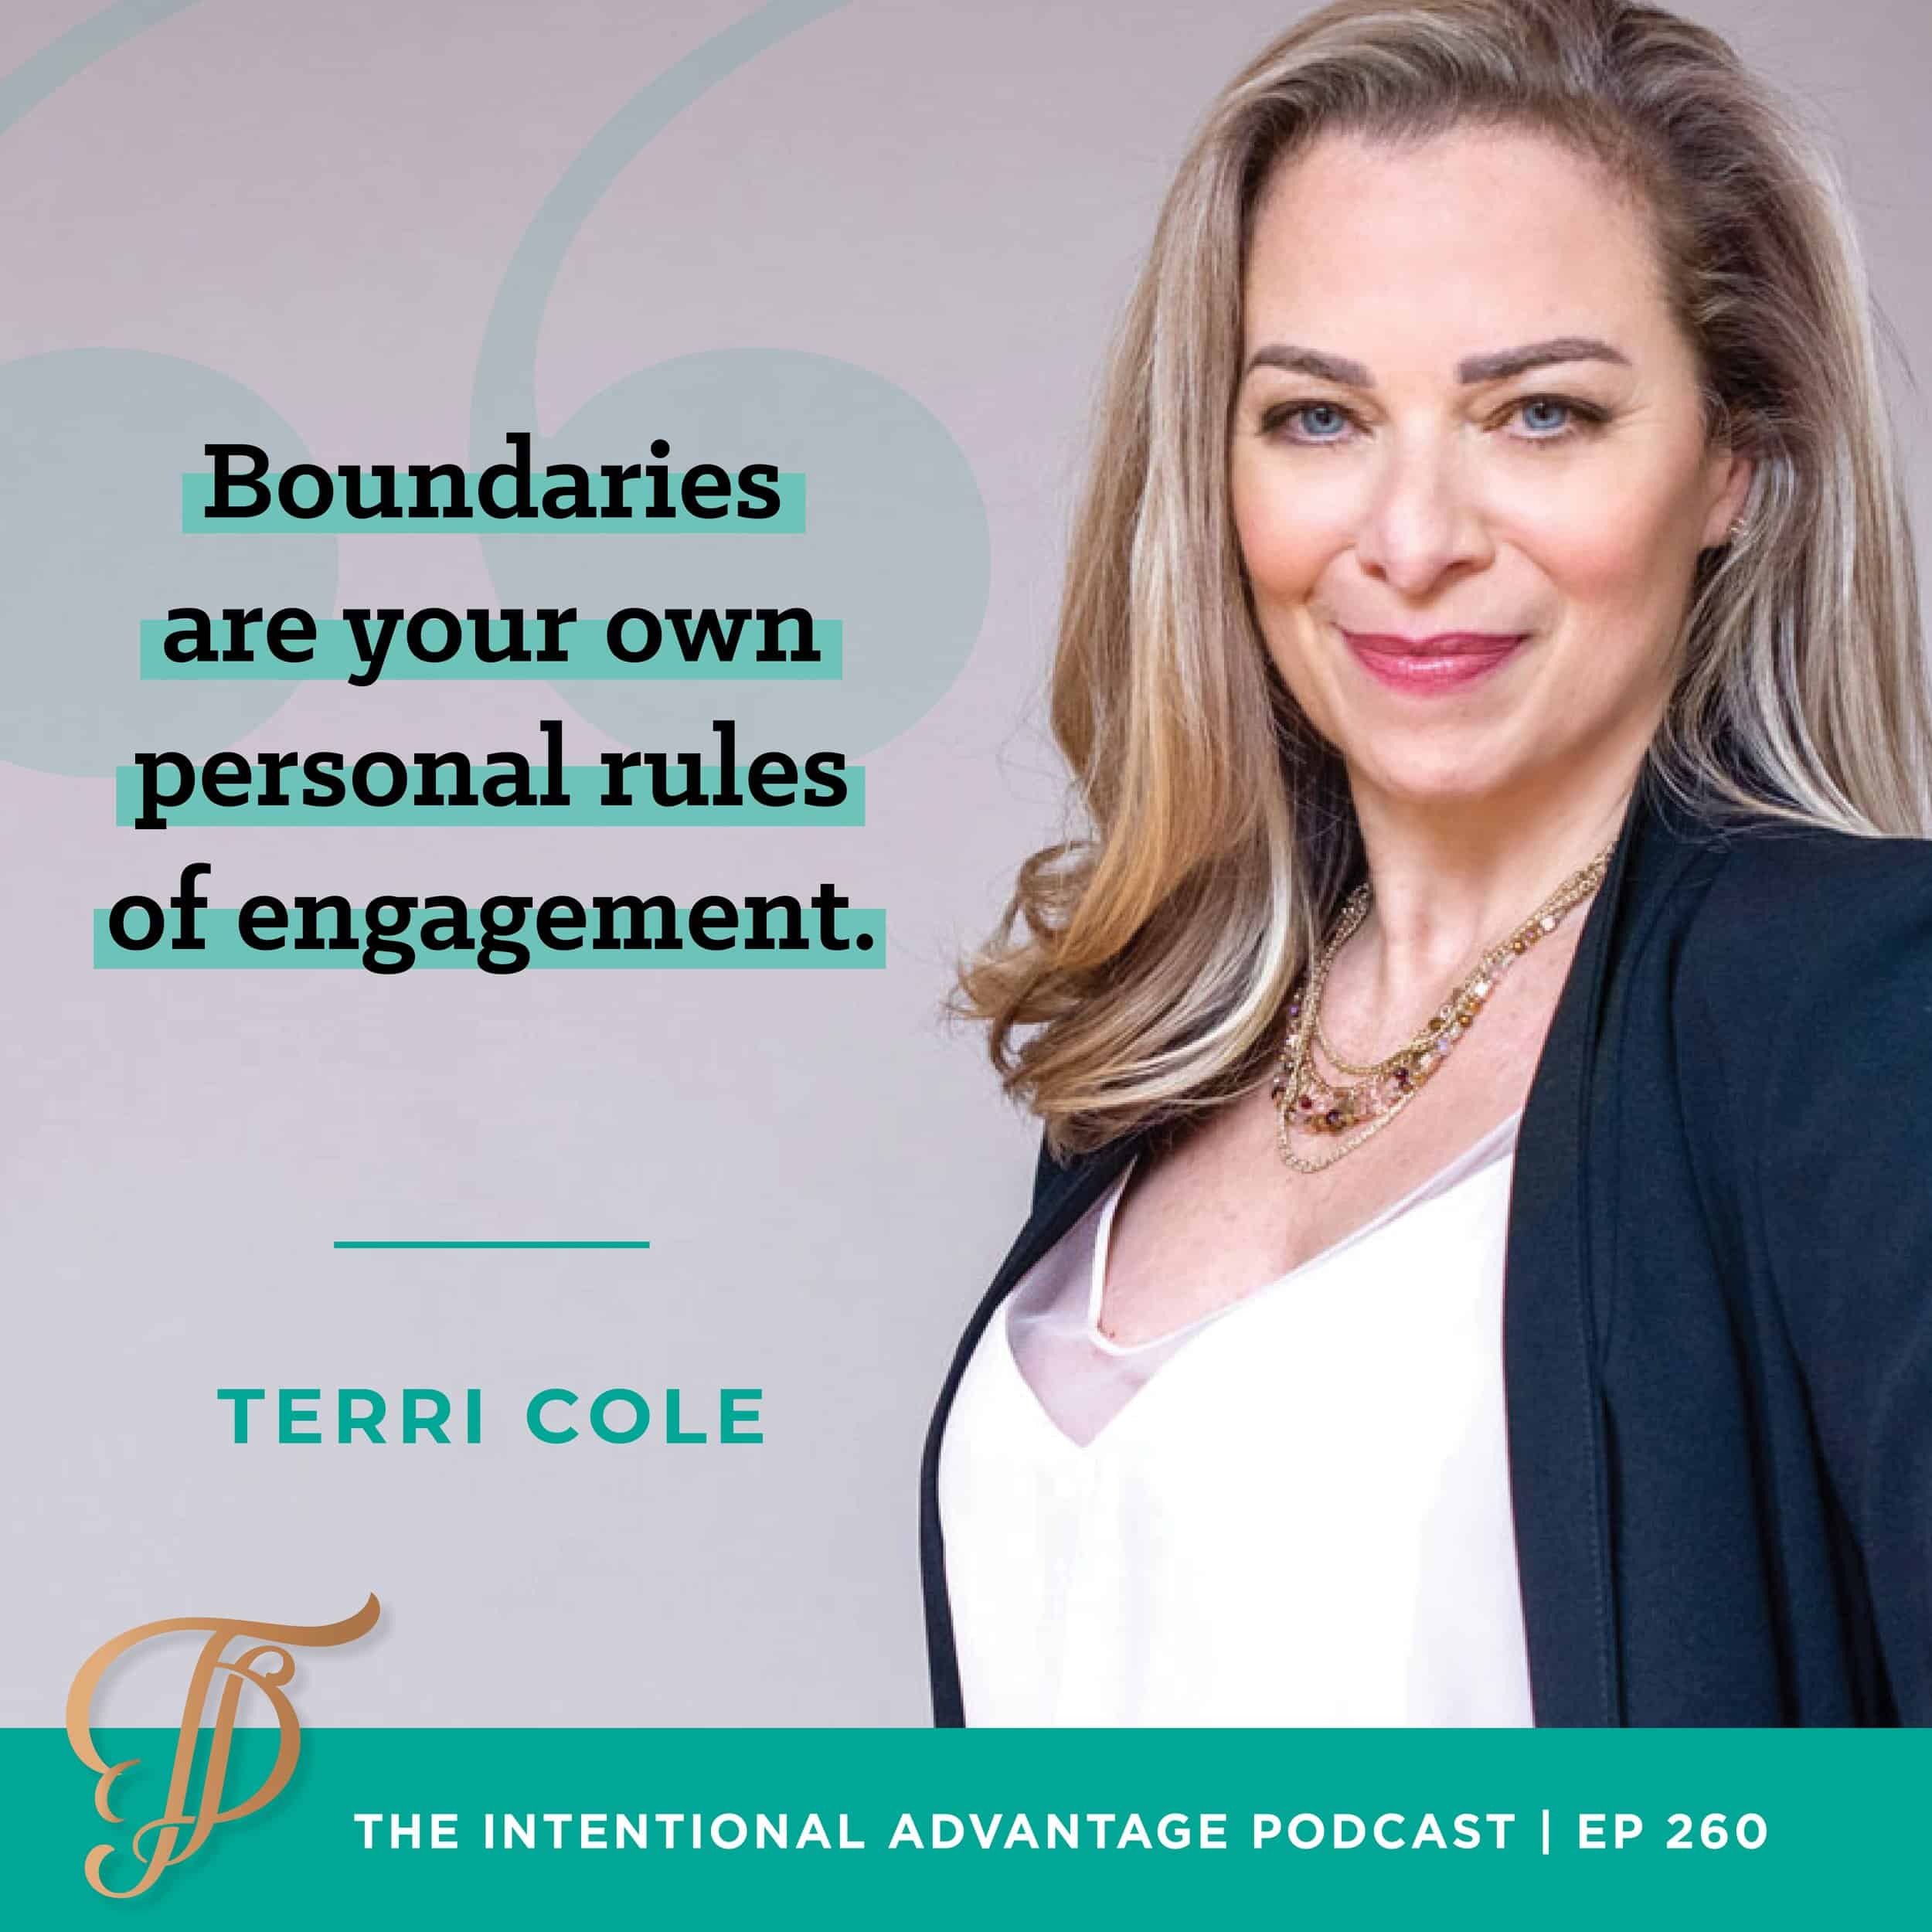 Terri Cole quote from her podcast interview on The Intentional Advantage